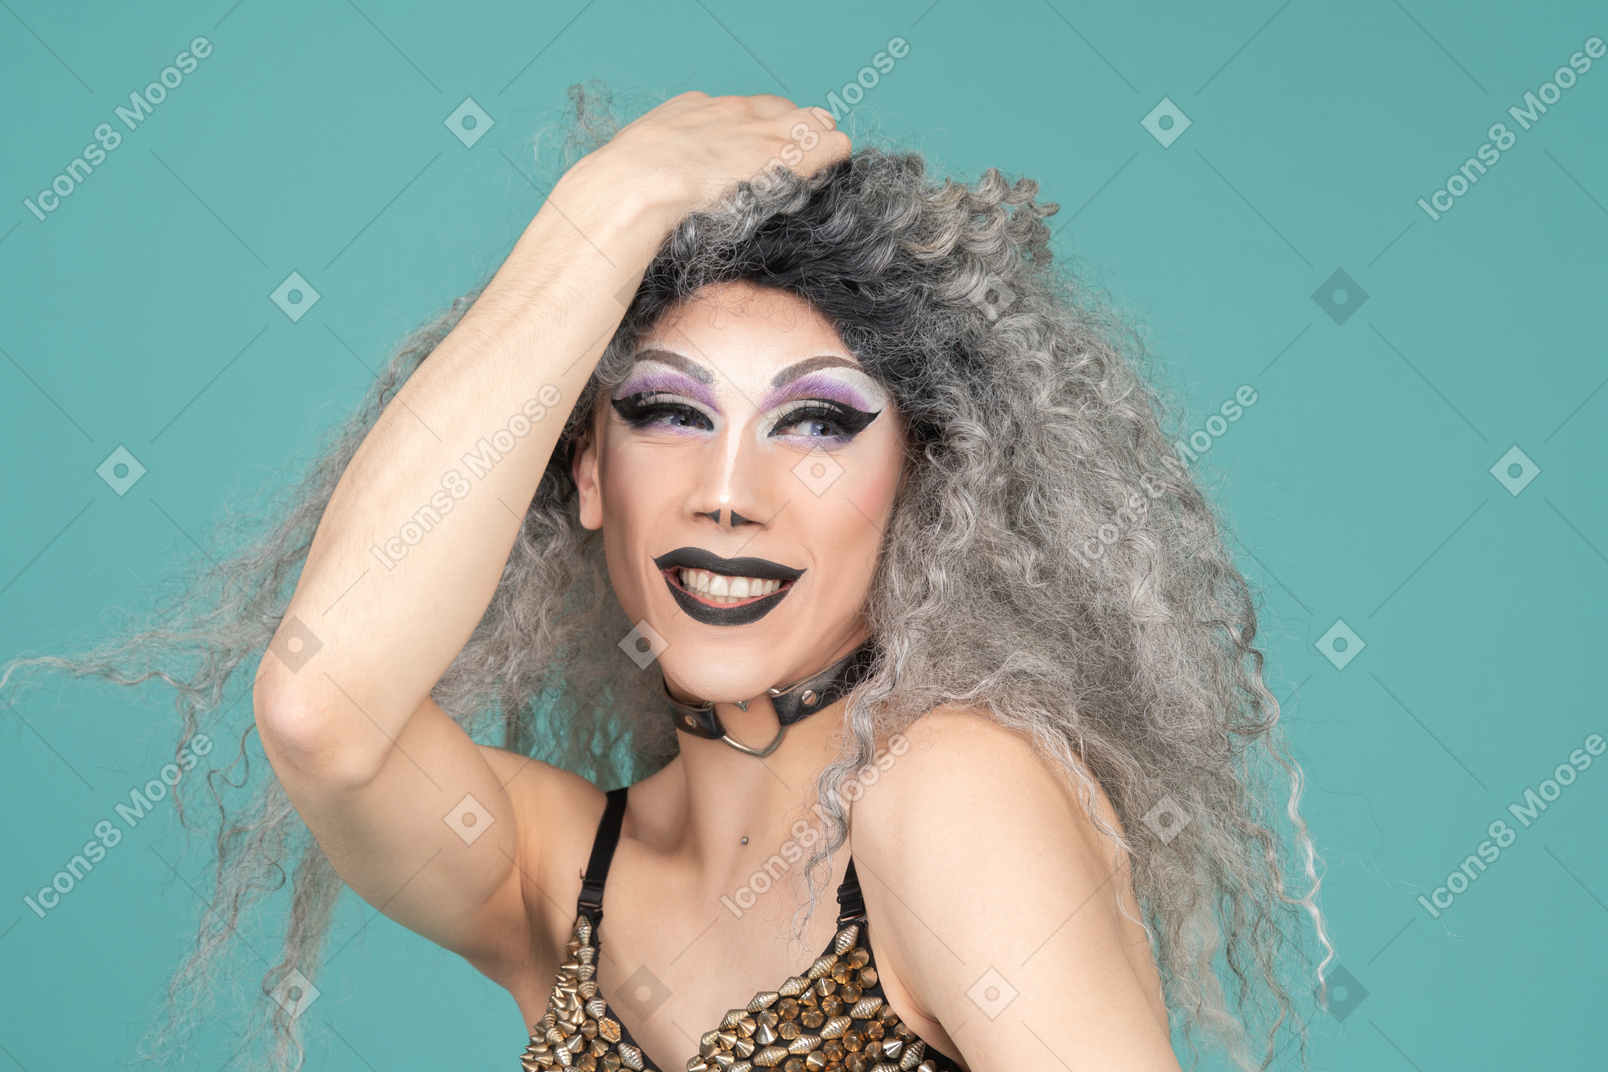 Headshot of a drag queen smiling with hand on top of head